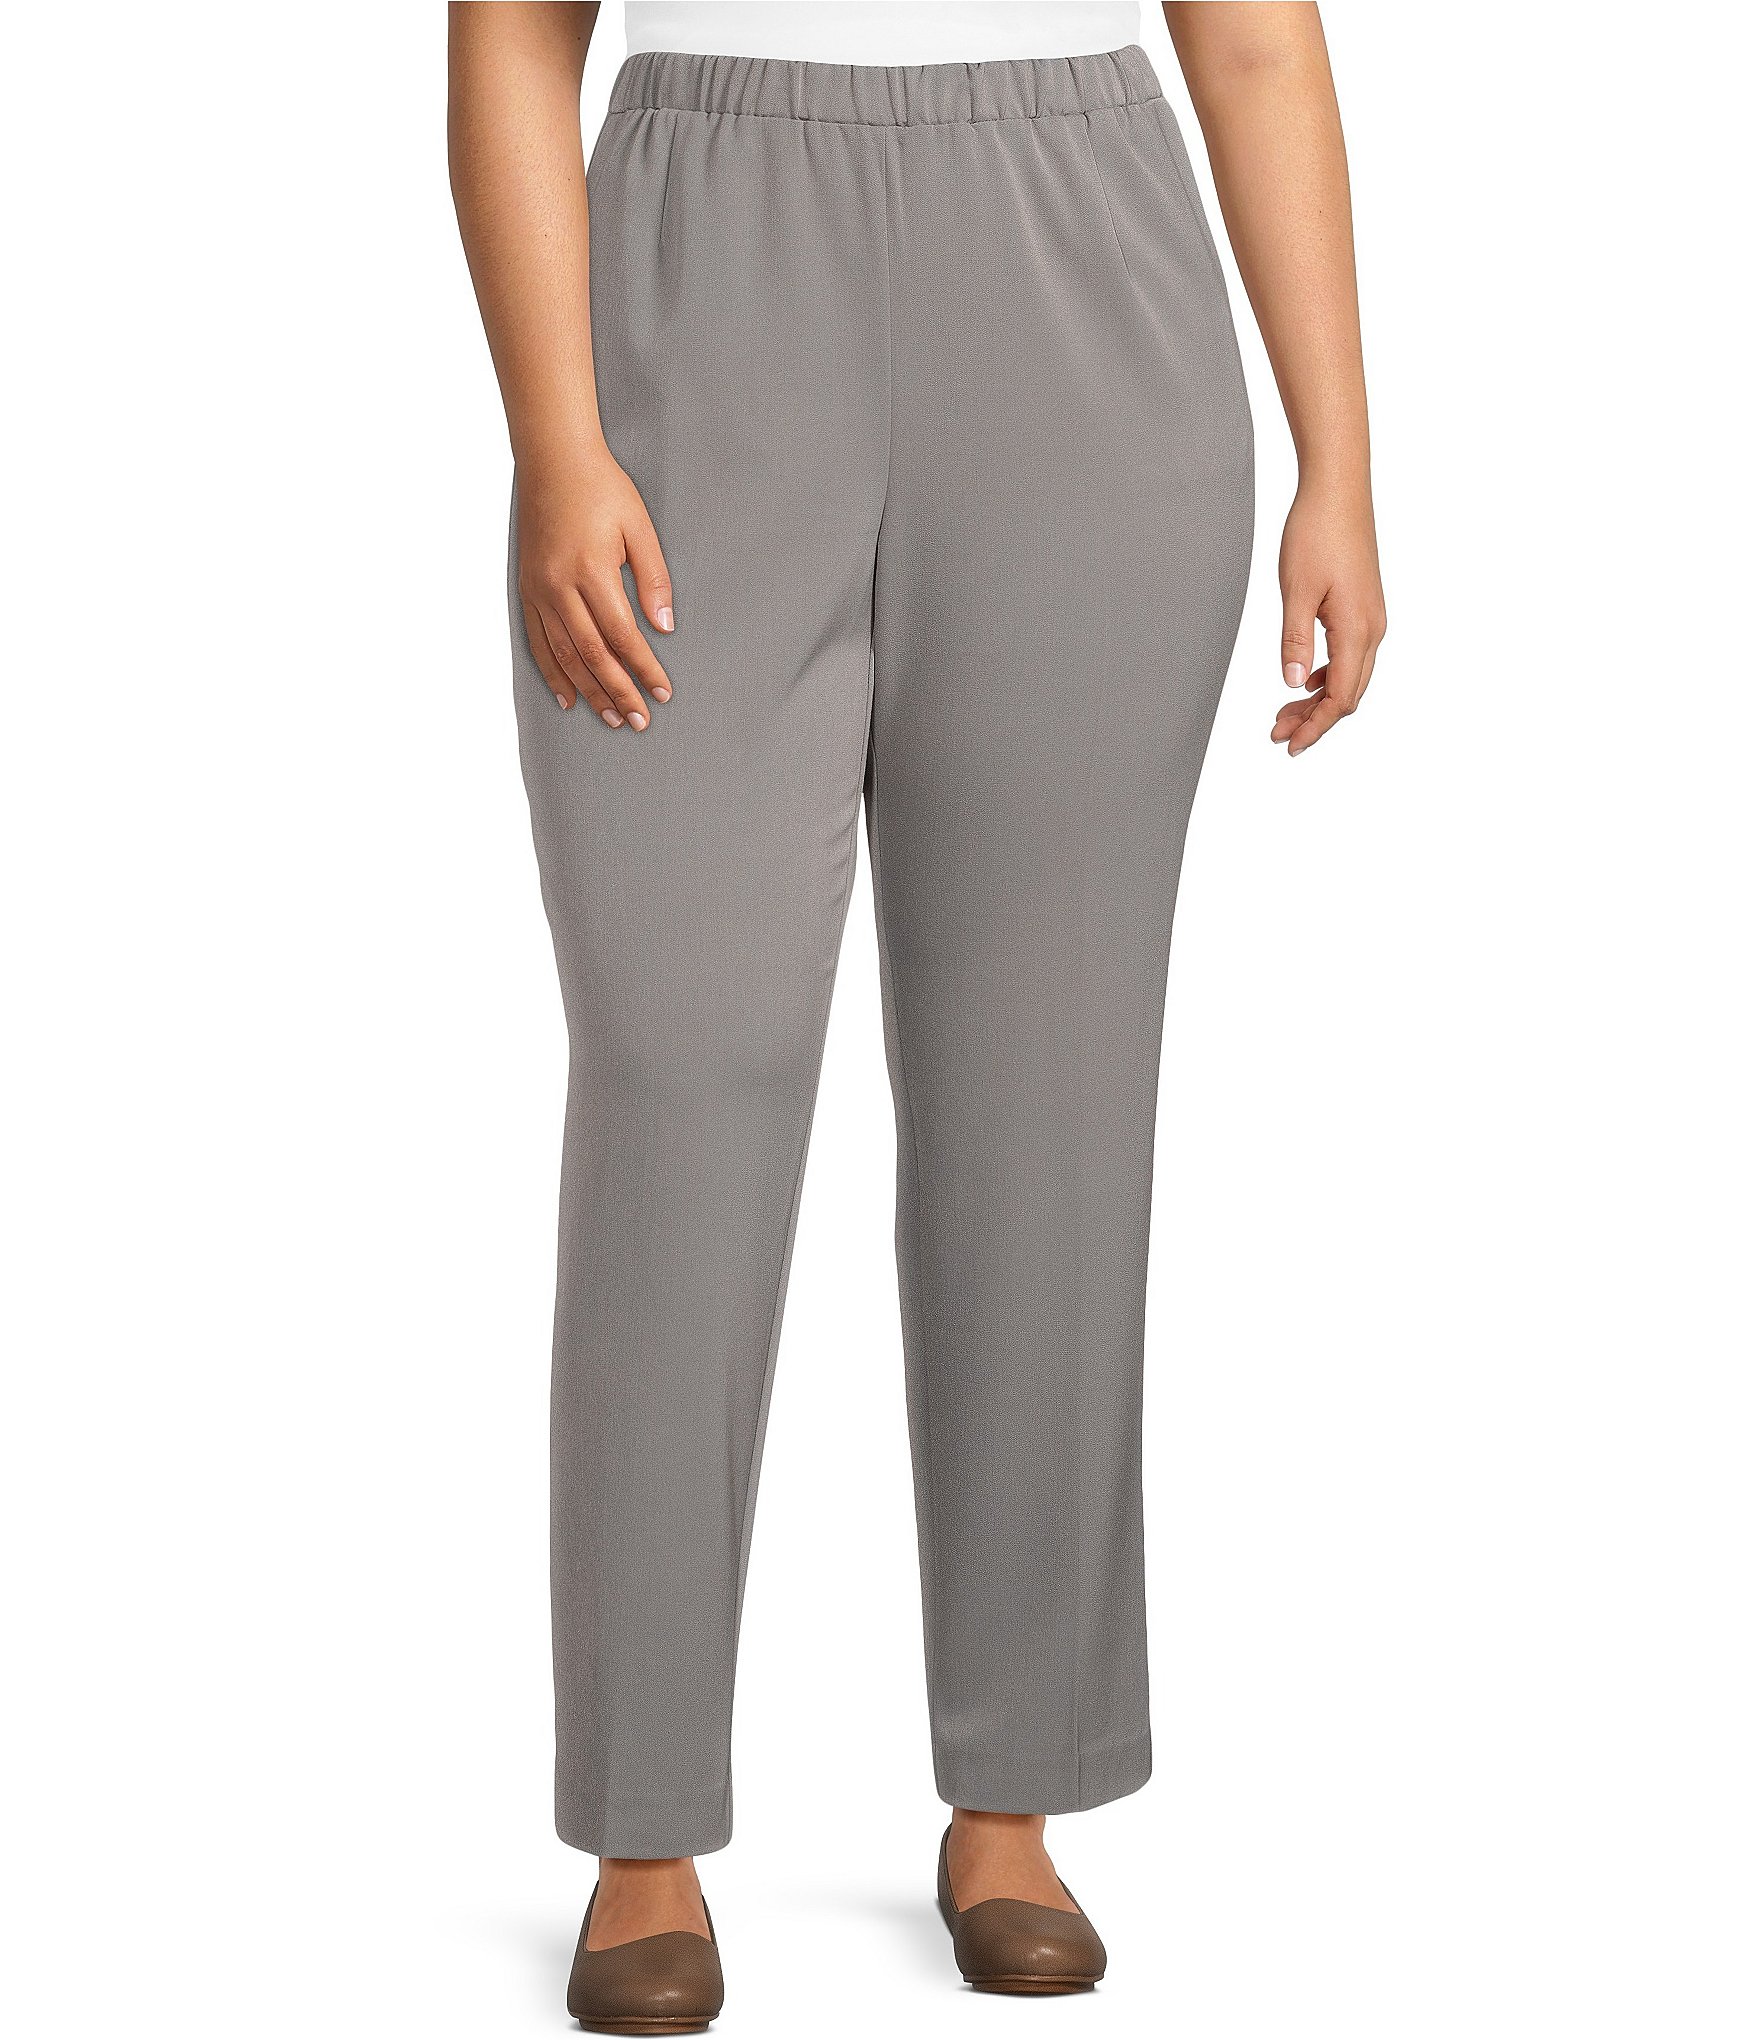 Terra & Sky Women's Plus Size 2 Pocket Pull On Pant, Also in